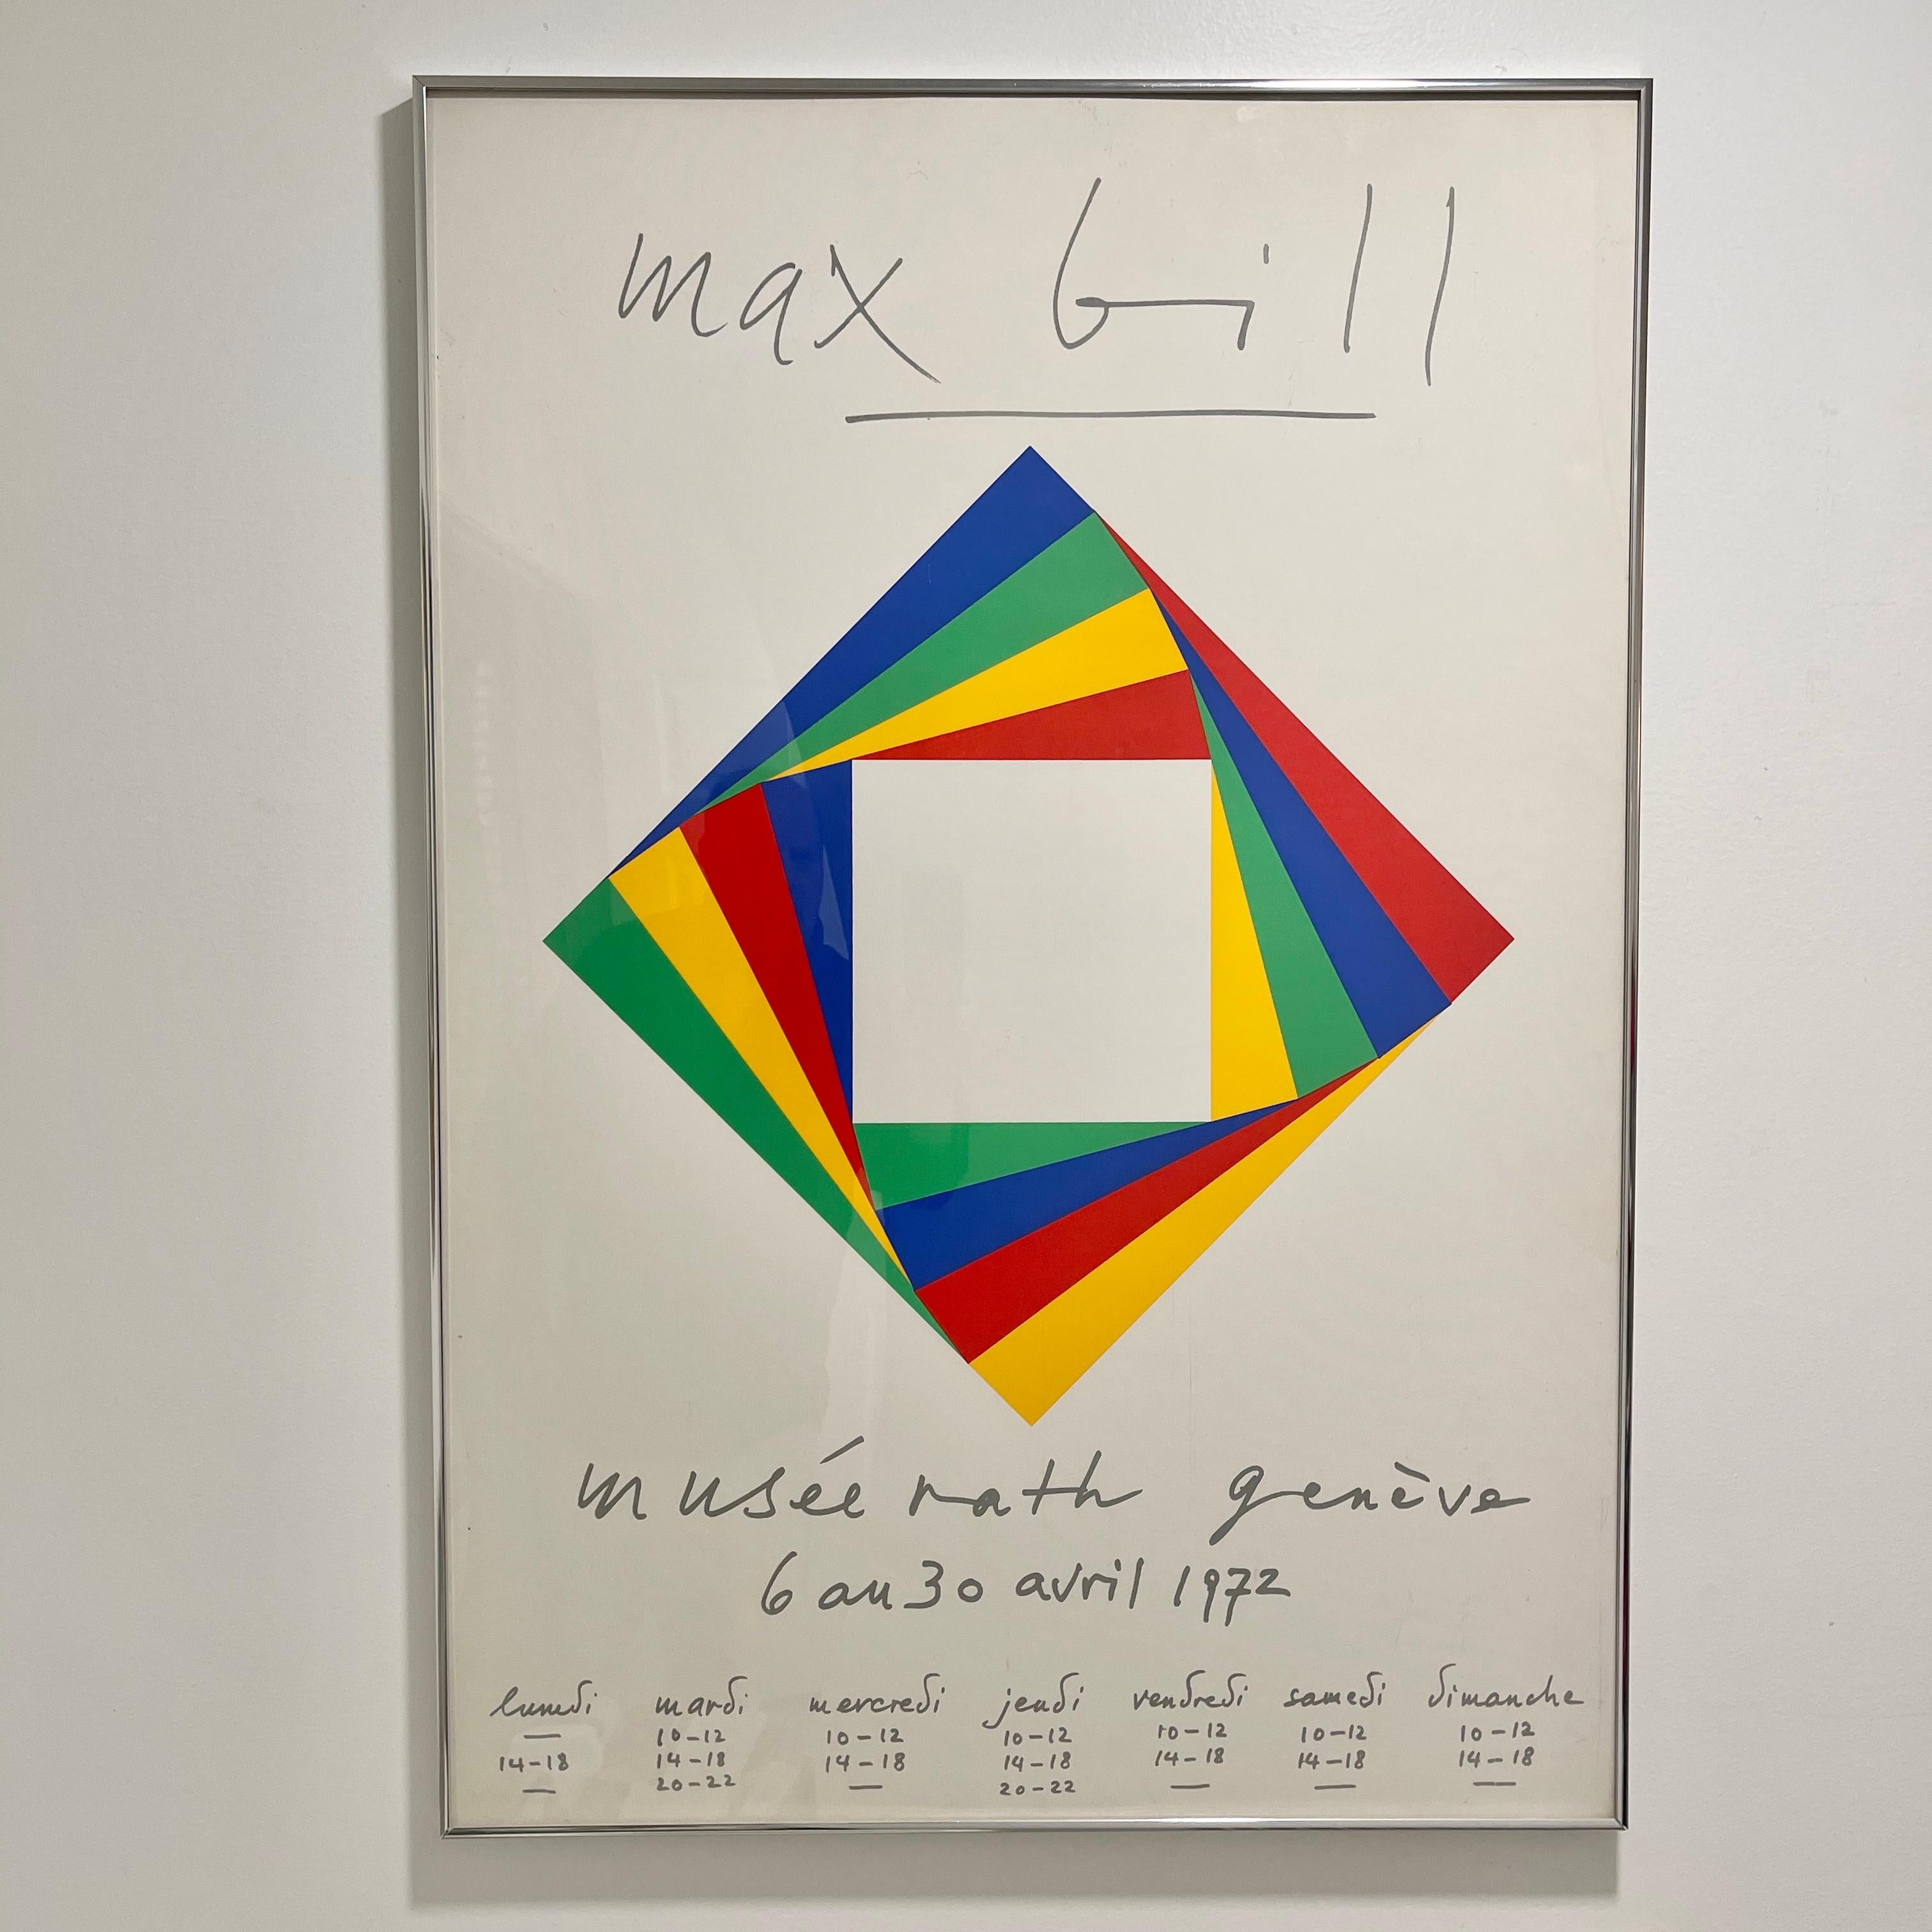 Max Bill (1908-1994) Geneva Museum exhibition serigraph, created to accompany the exhibition of works by Max Bill held from 6 April through 30 April 1972 at the Musee Rath in Geneva, Switzerland.
Presented under glass with a silver toned metal